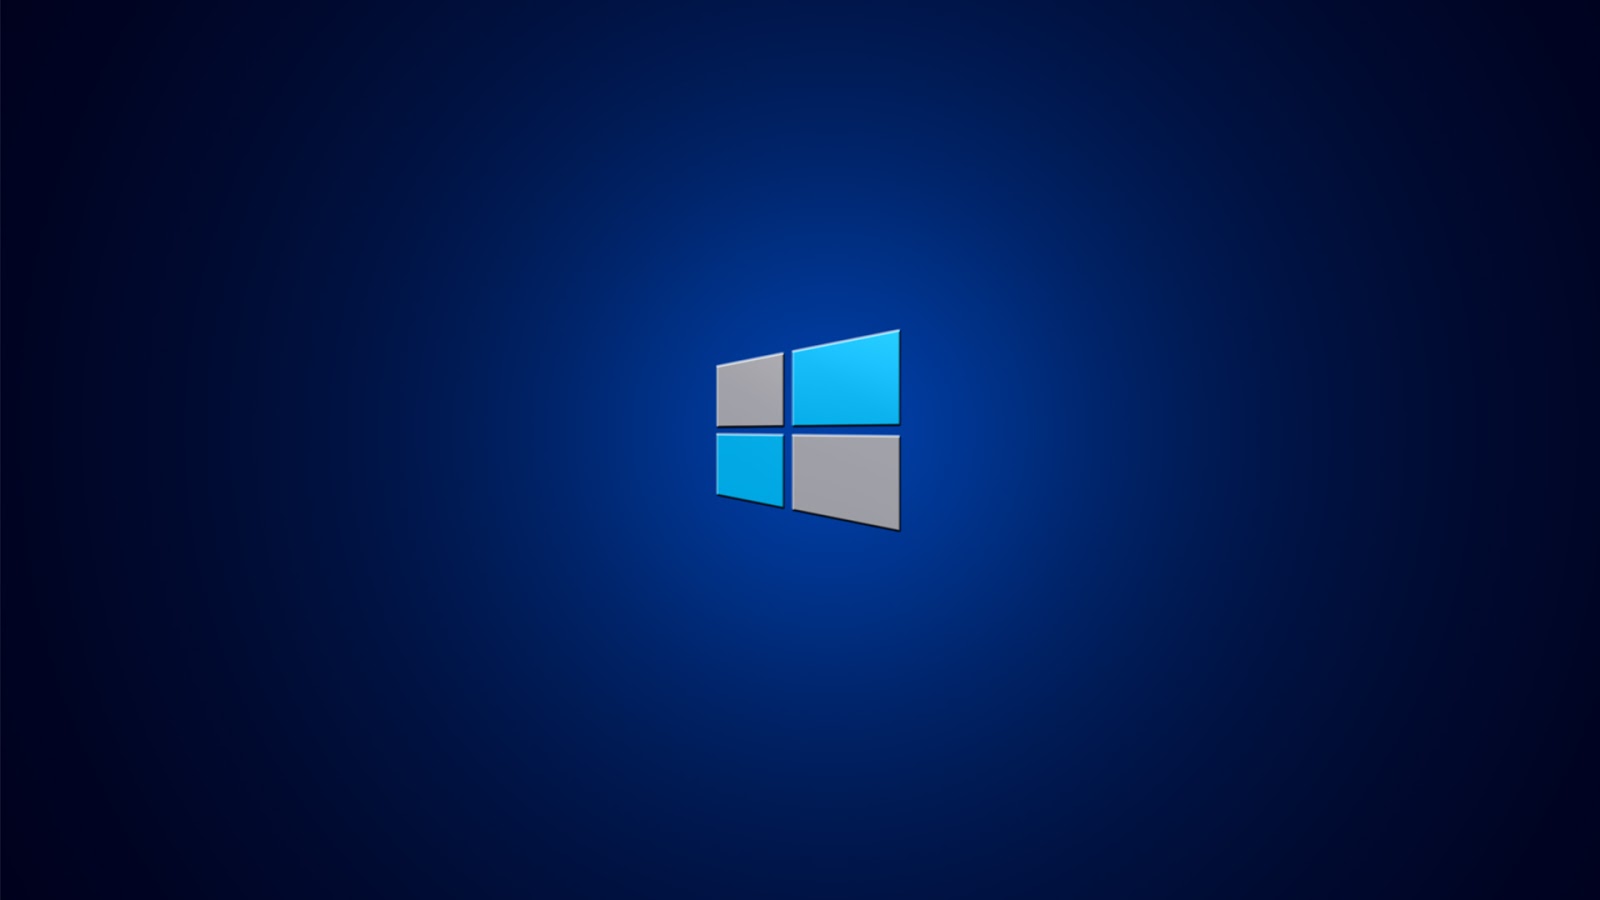 Windows 8 Full HD wallpapers 1080p
 Full Hd Wallpapers For Windows 8 1920x1080